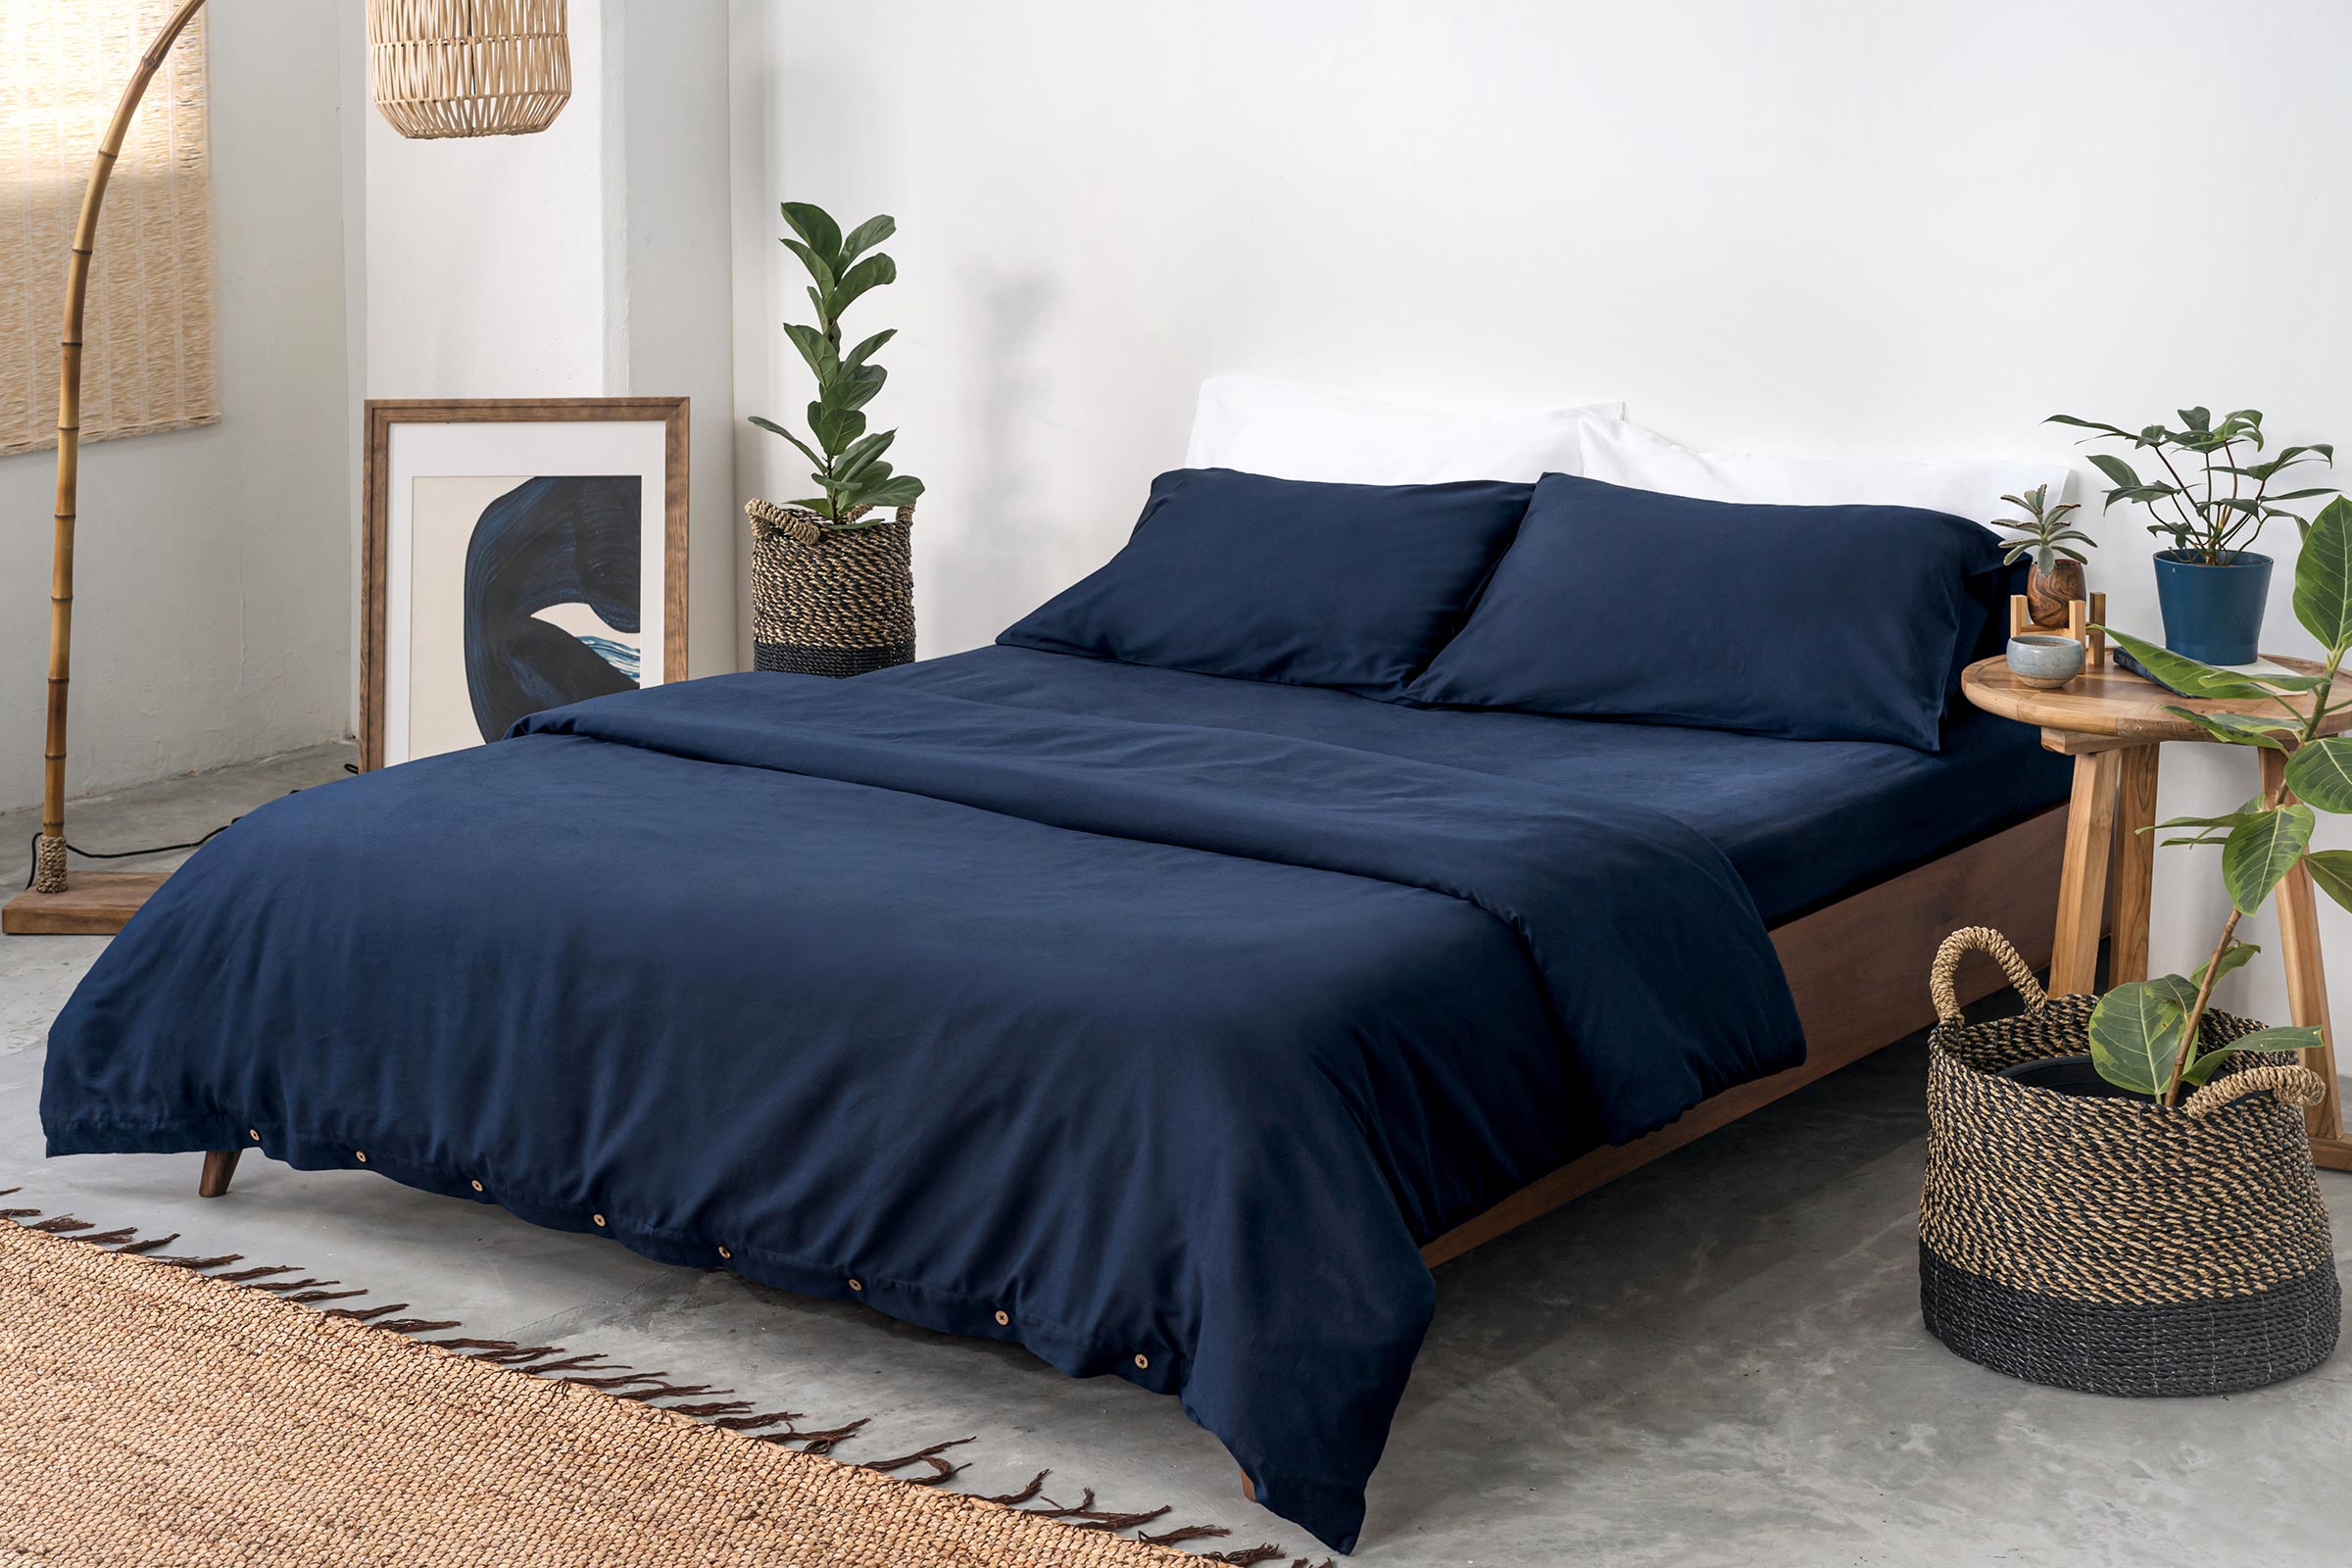 classic-navy-duvet-cover-fitted-sheet-pillowcase-pair-white-pillowcase-pair-side-view-by-sojao.jpg